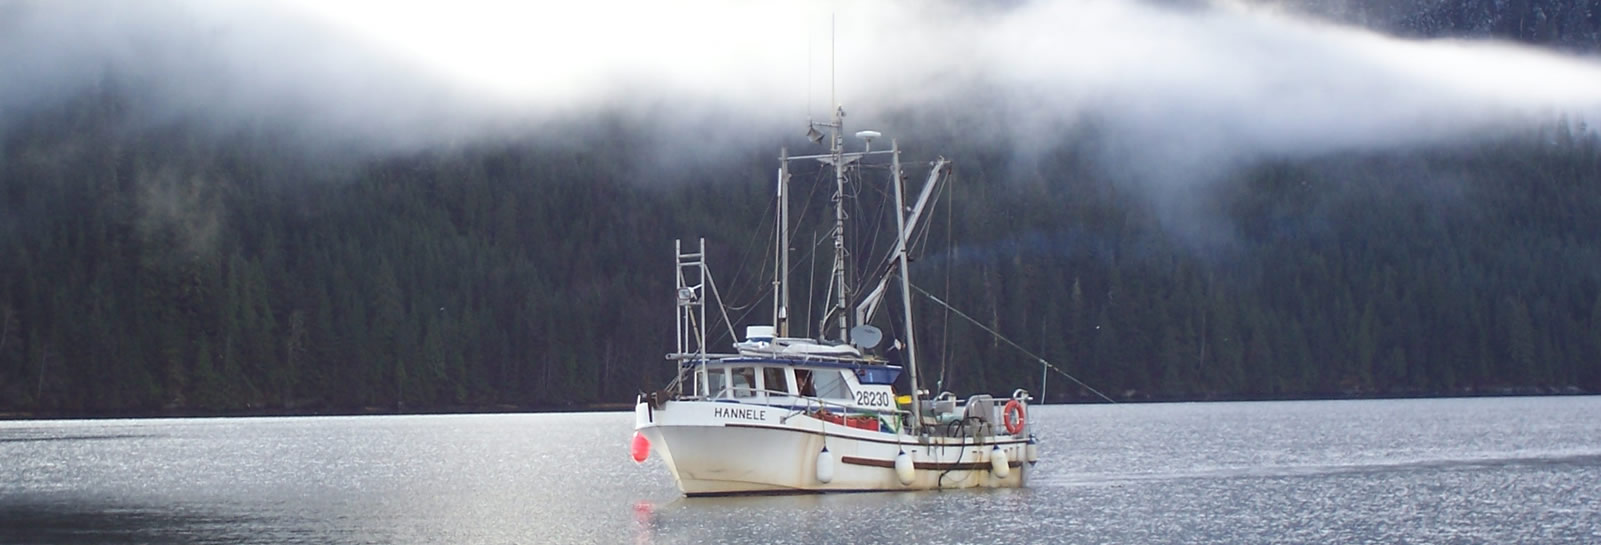 Commercial Fisherman's Boat